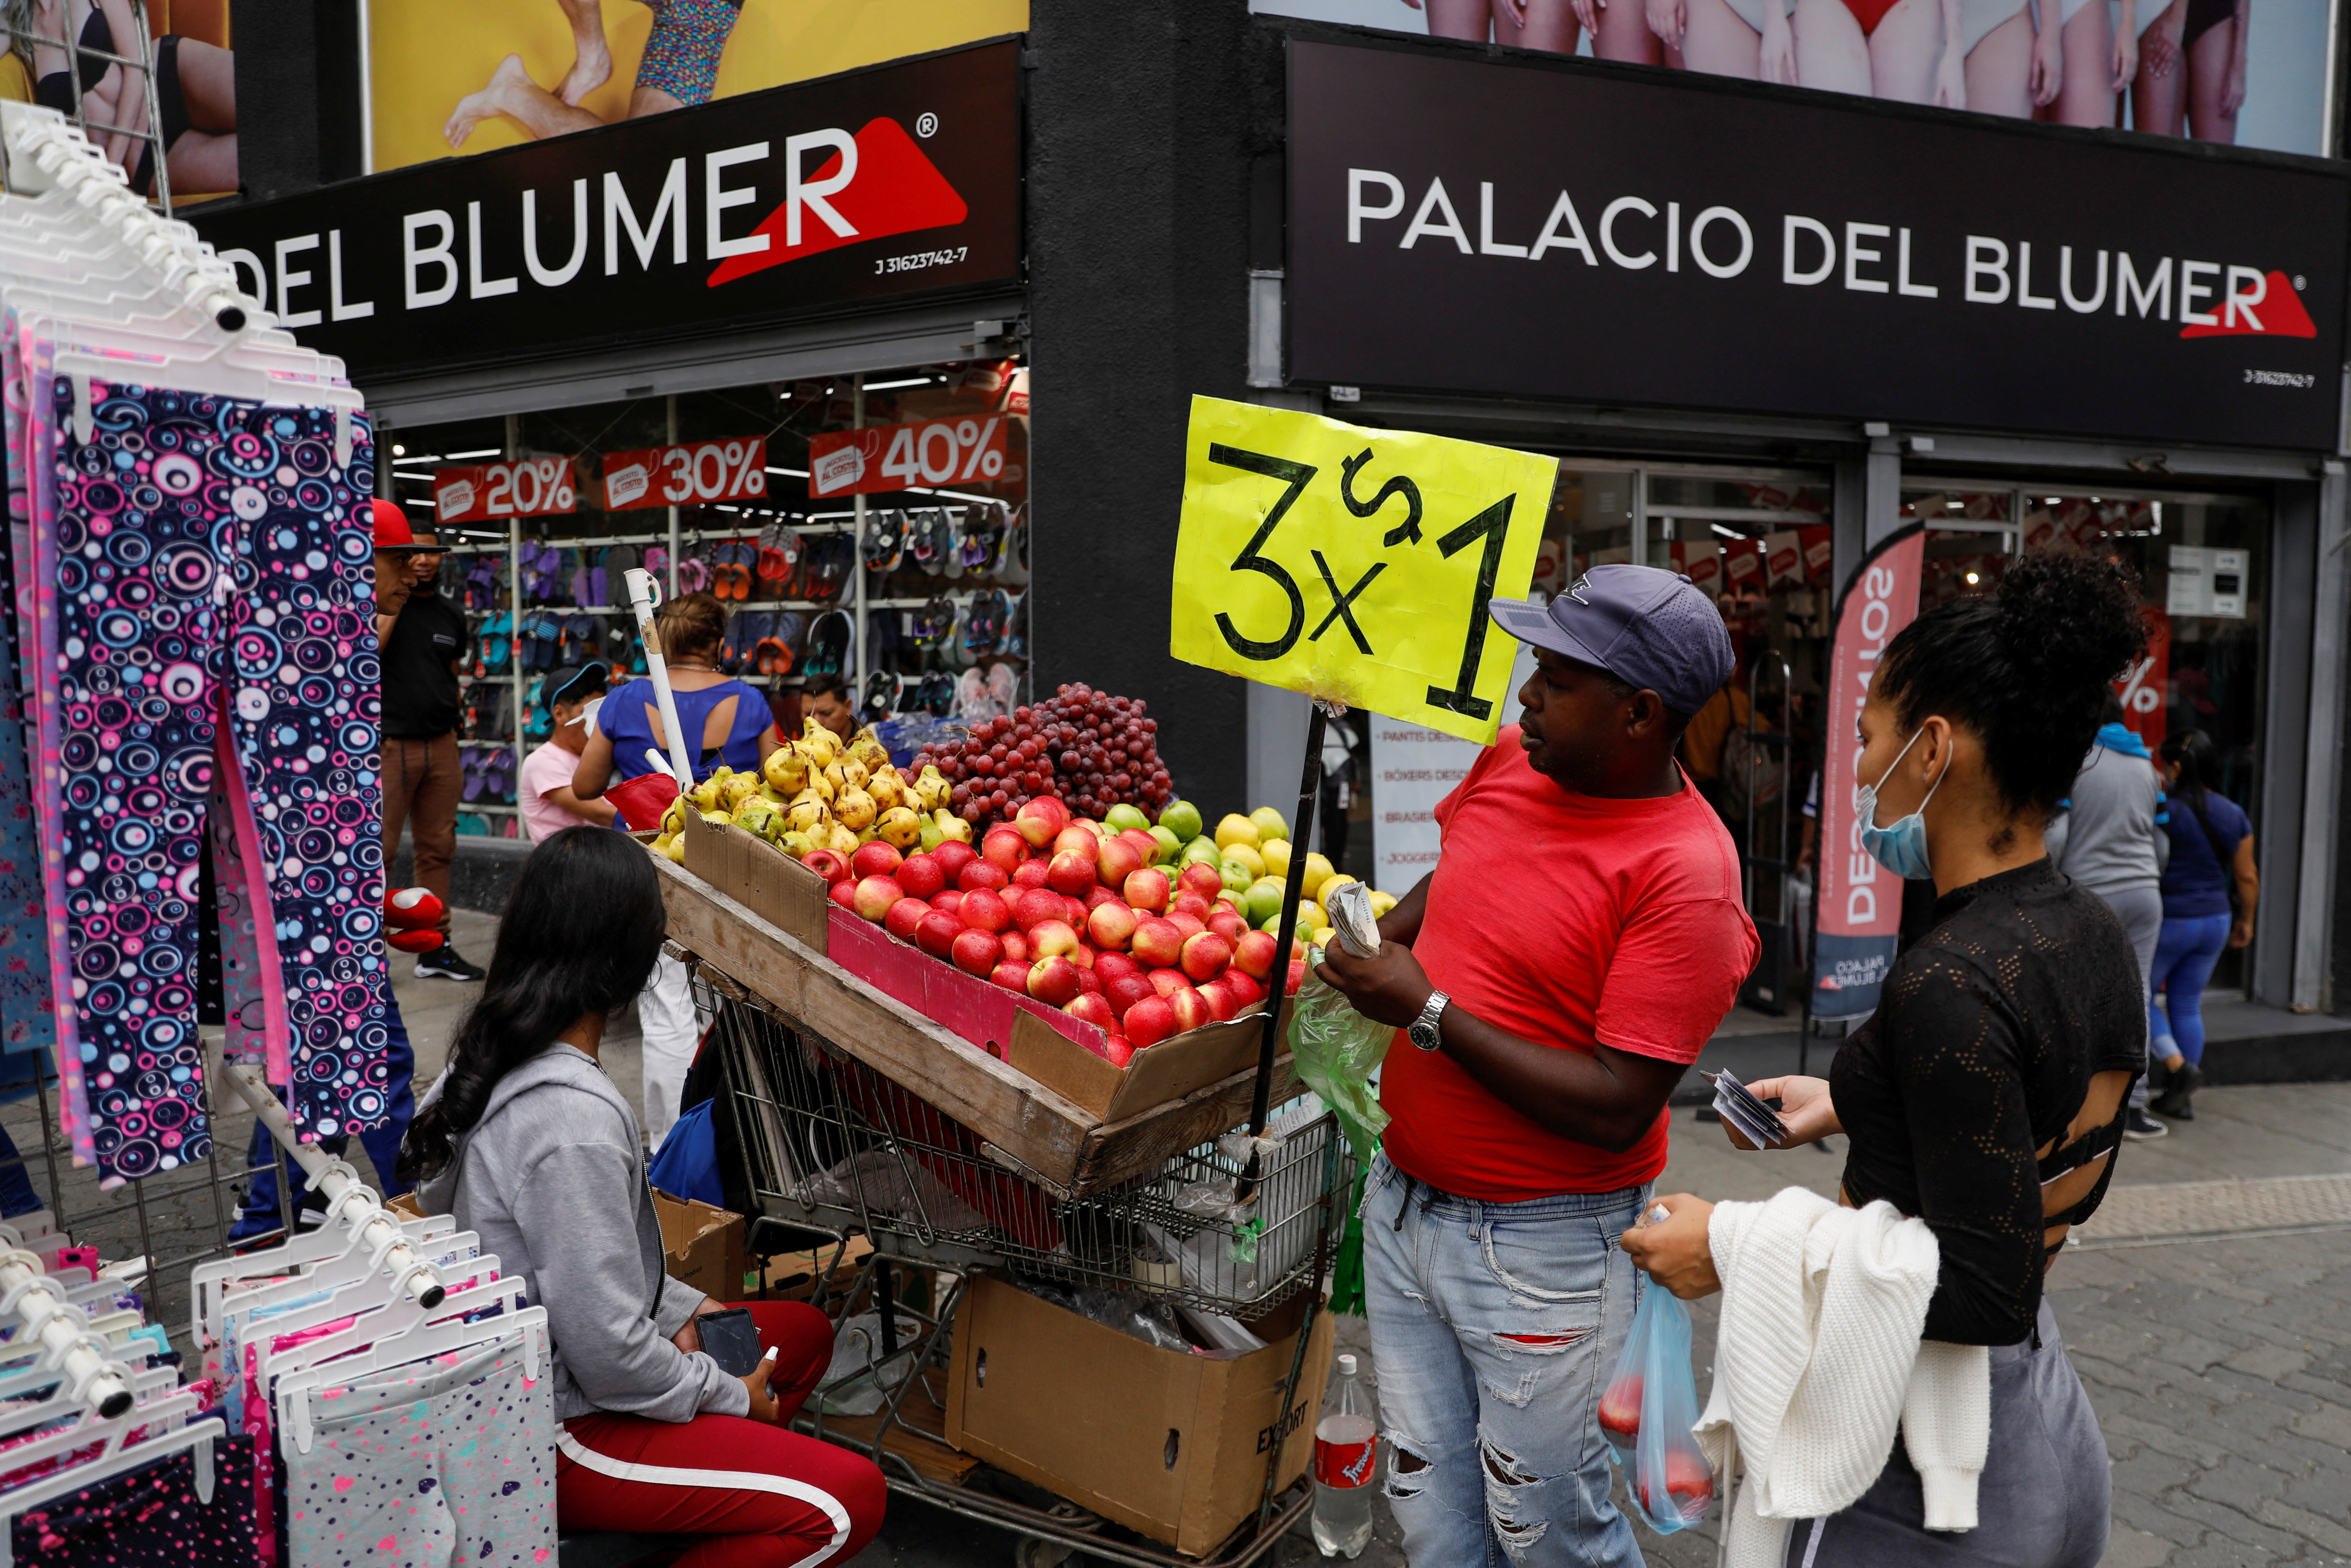 Rising dollar may stymie Venezuela's efforts to combat inflation